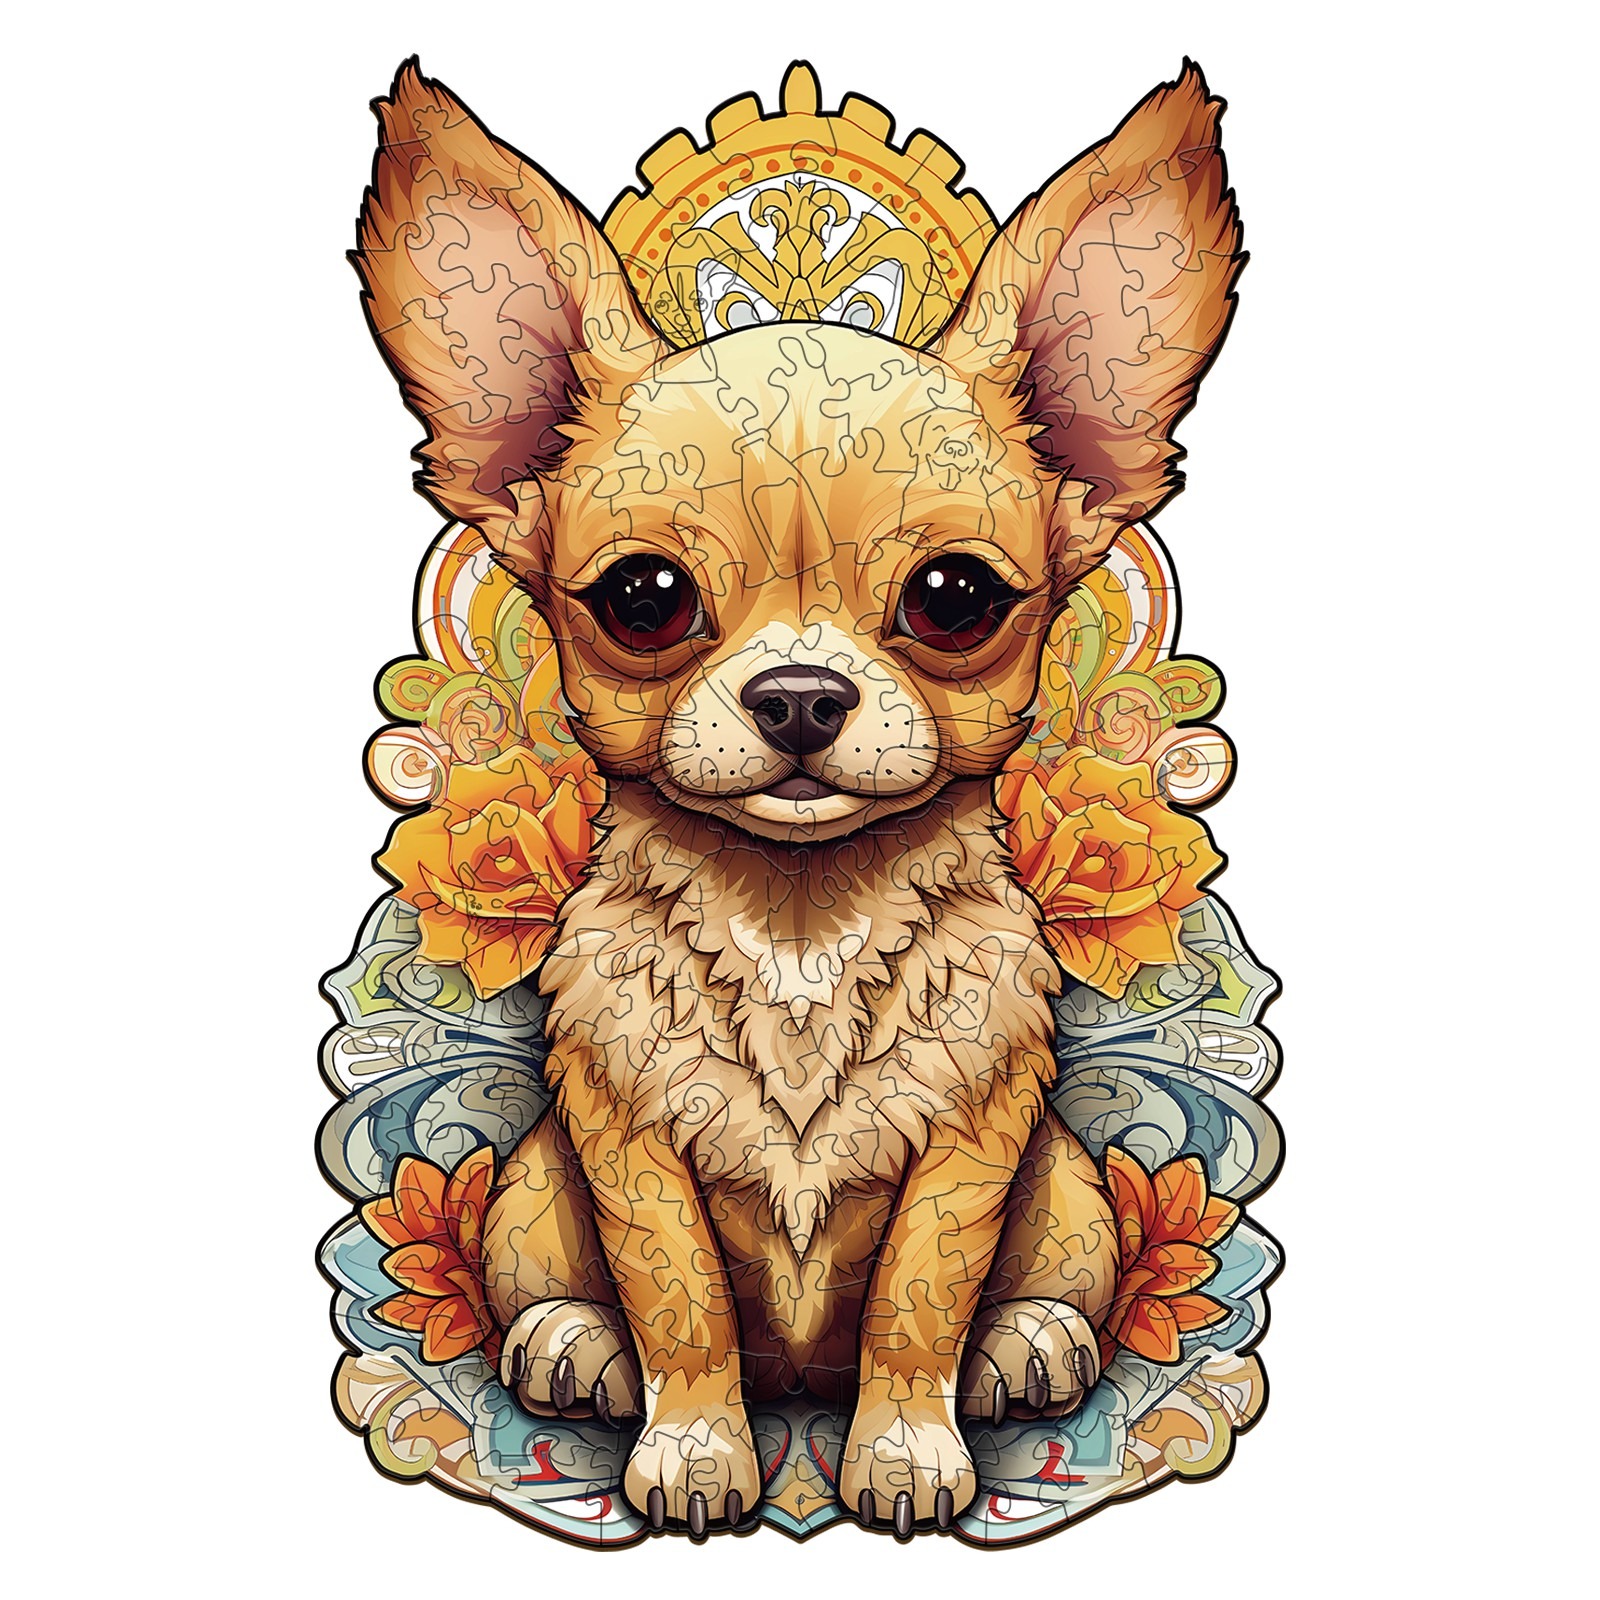 https://kaayee.com/wp-content/uploads/2023/11/wooden-jigsaw-puzzle-cute-chihuahua-2-2023-11-18_07-59-31_333227.jpg